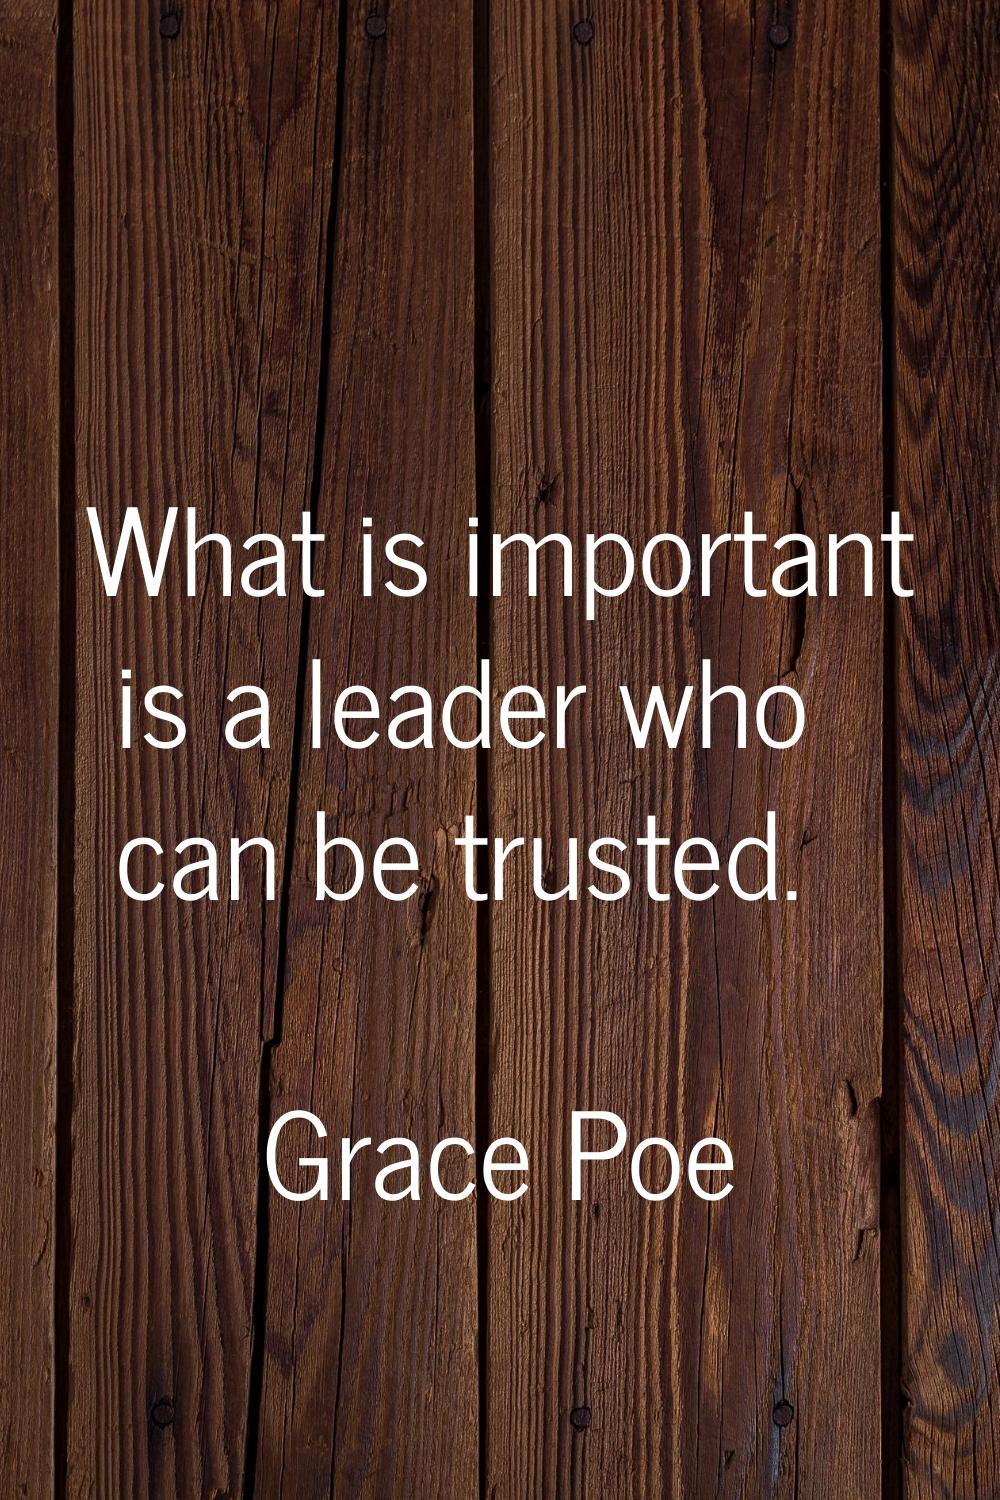 What is important is a leader who can be trusted.